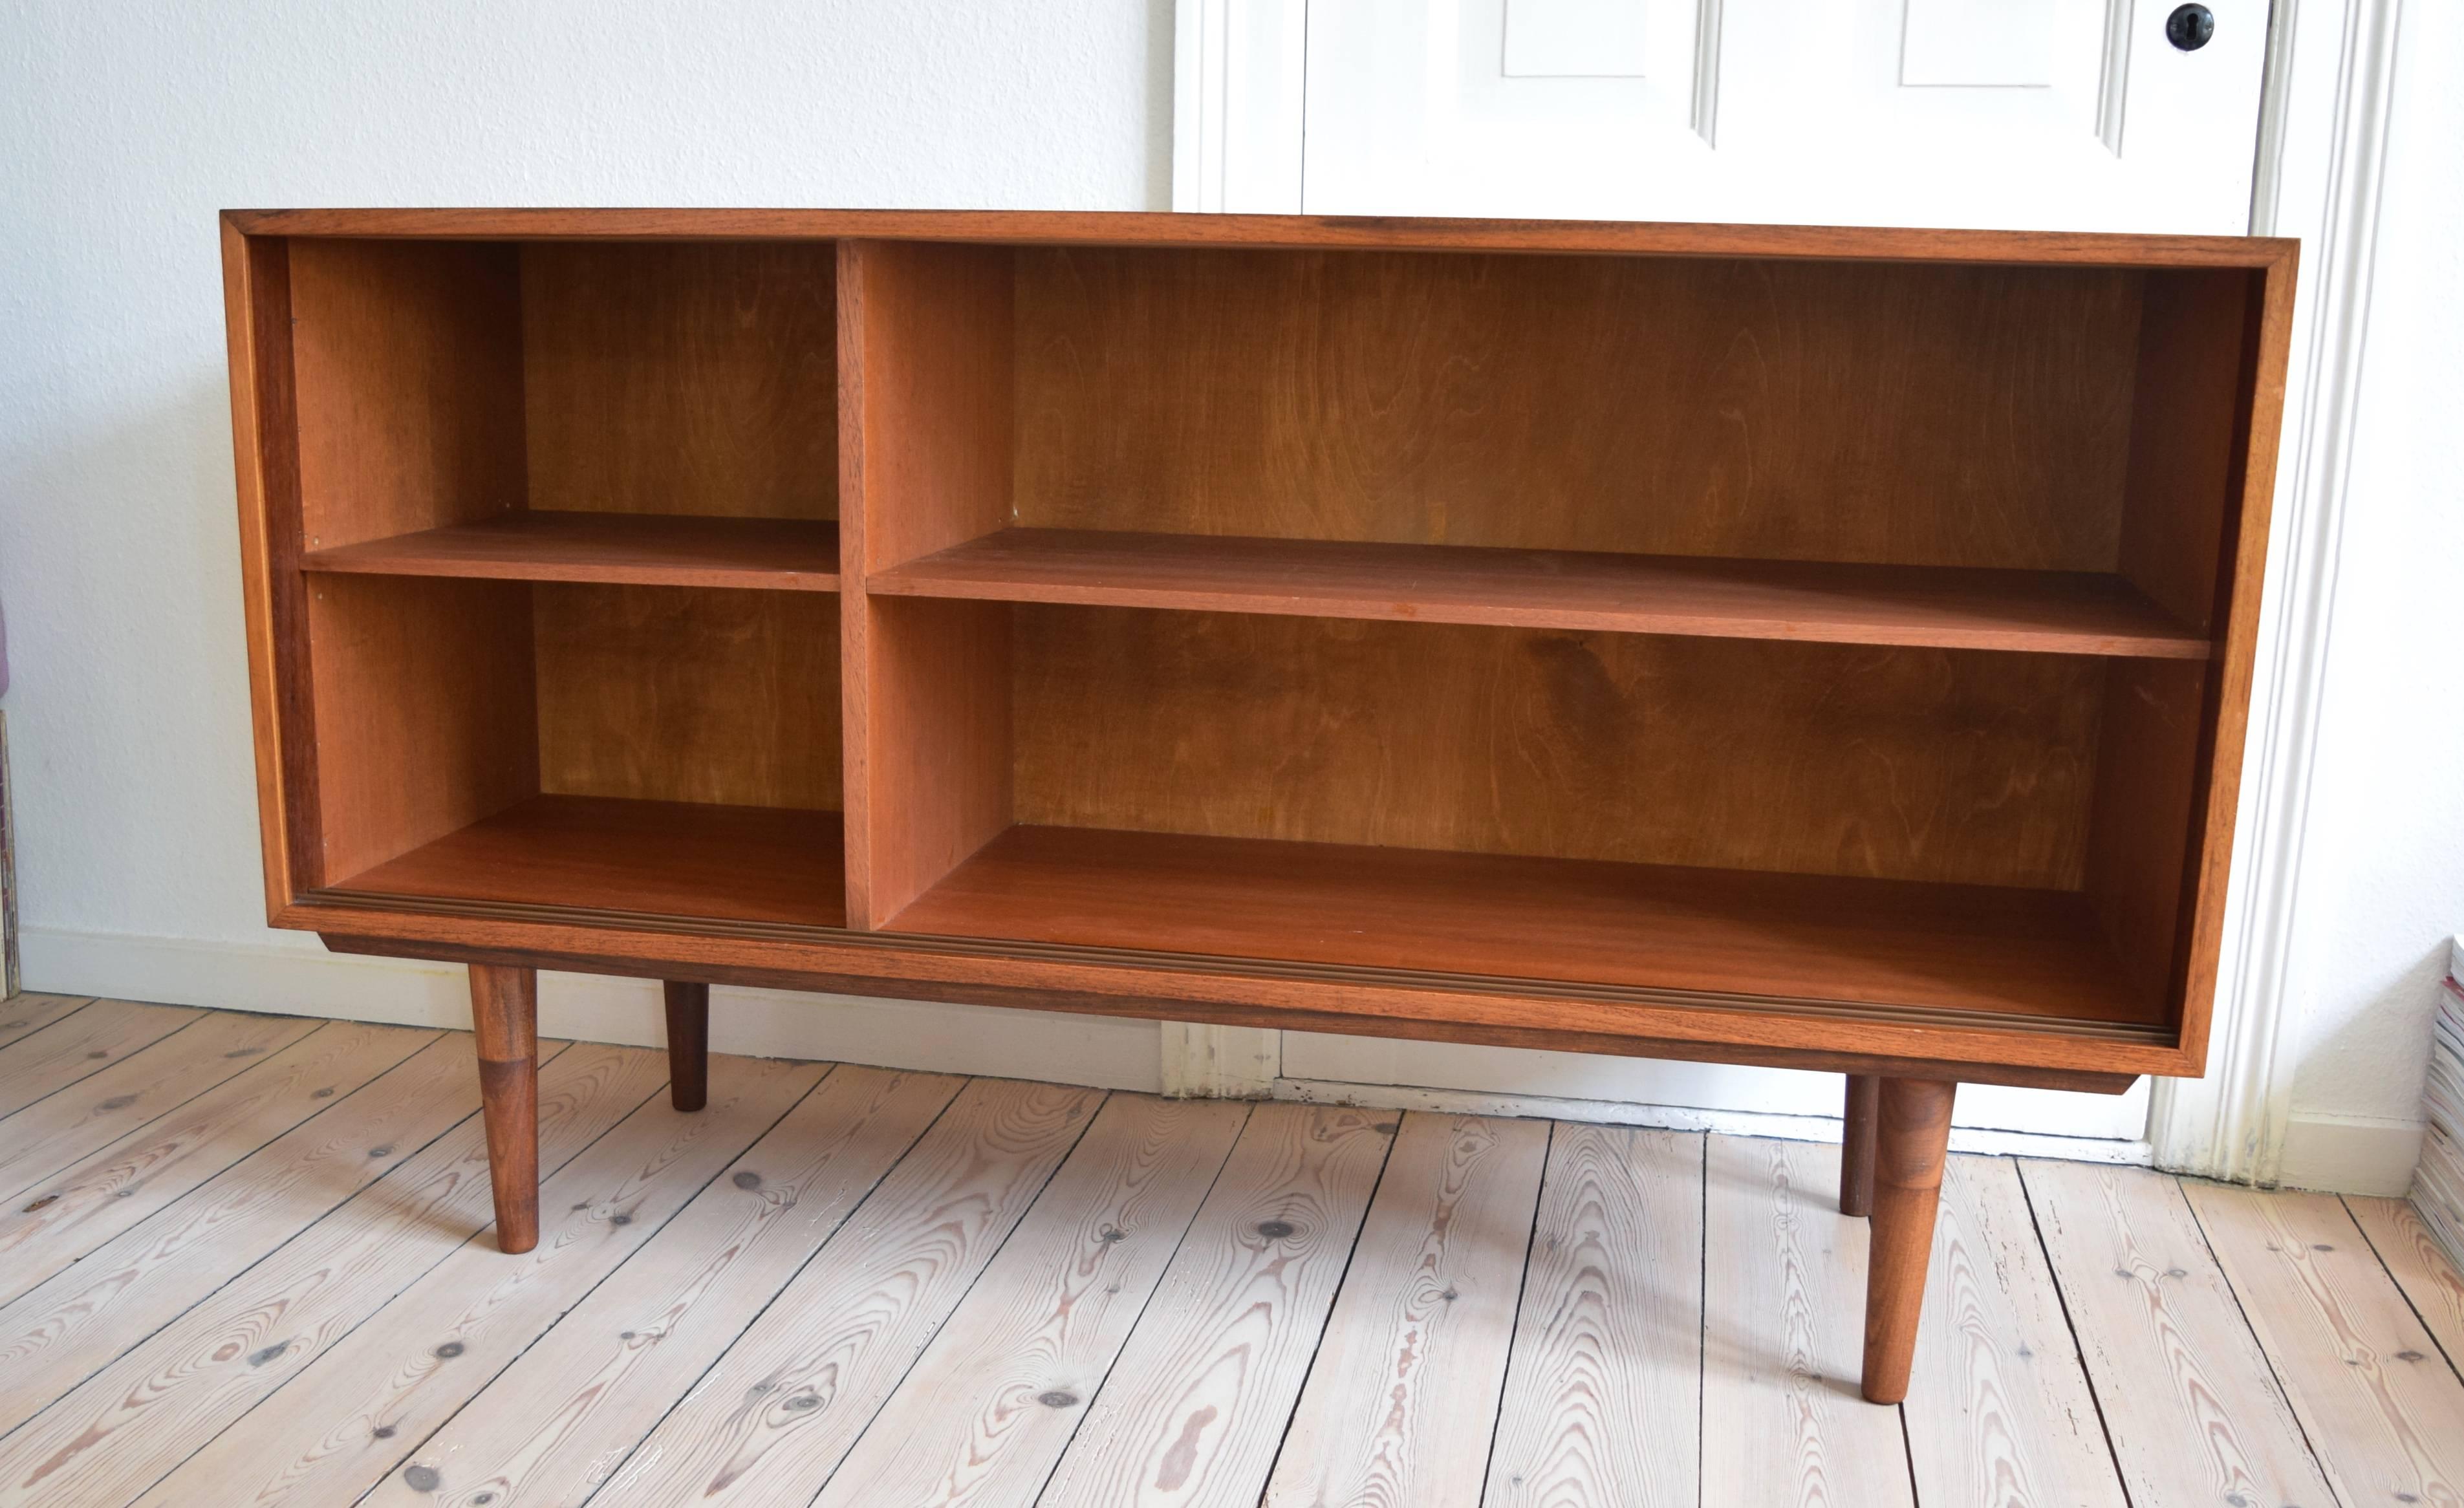 Low rosewood sideboard manufactured by Viby Møbler in Denmark in the 1960s. This piece features two sliding doors with solid rosewood handles and teak veneer shelves. Sits on turned and tapered two-tone teak legs. Stunning wood grain throughout this